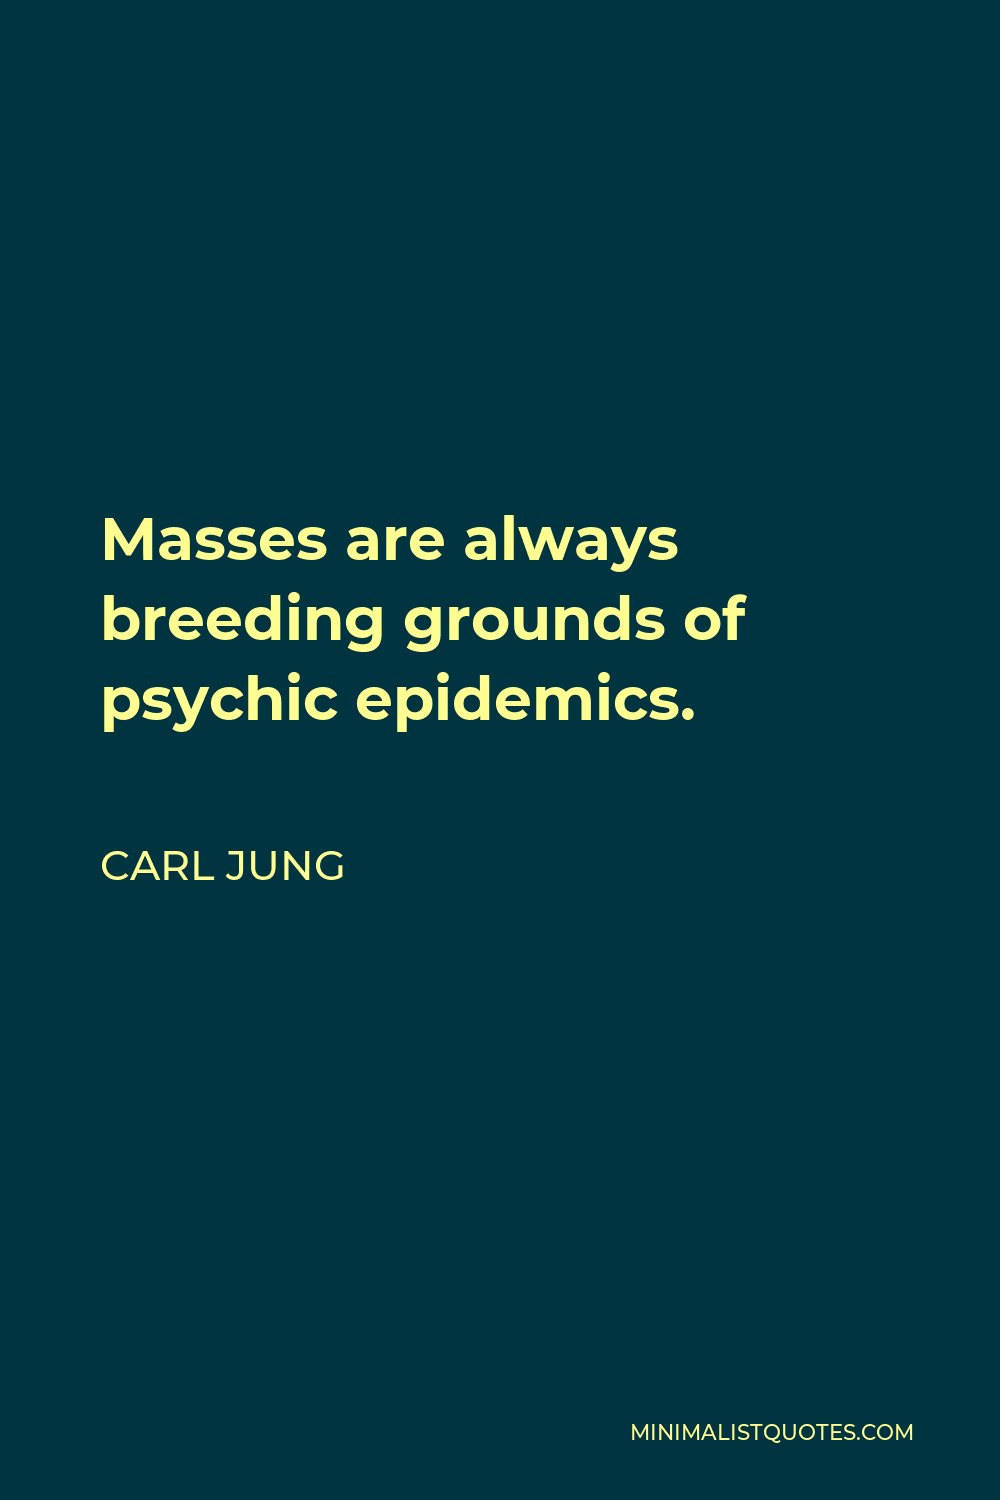 Carl Jung Quote - Masses are always breeding grounds of psychic epidemics.